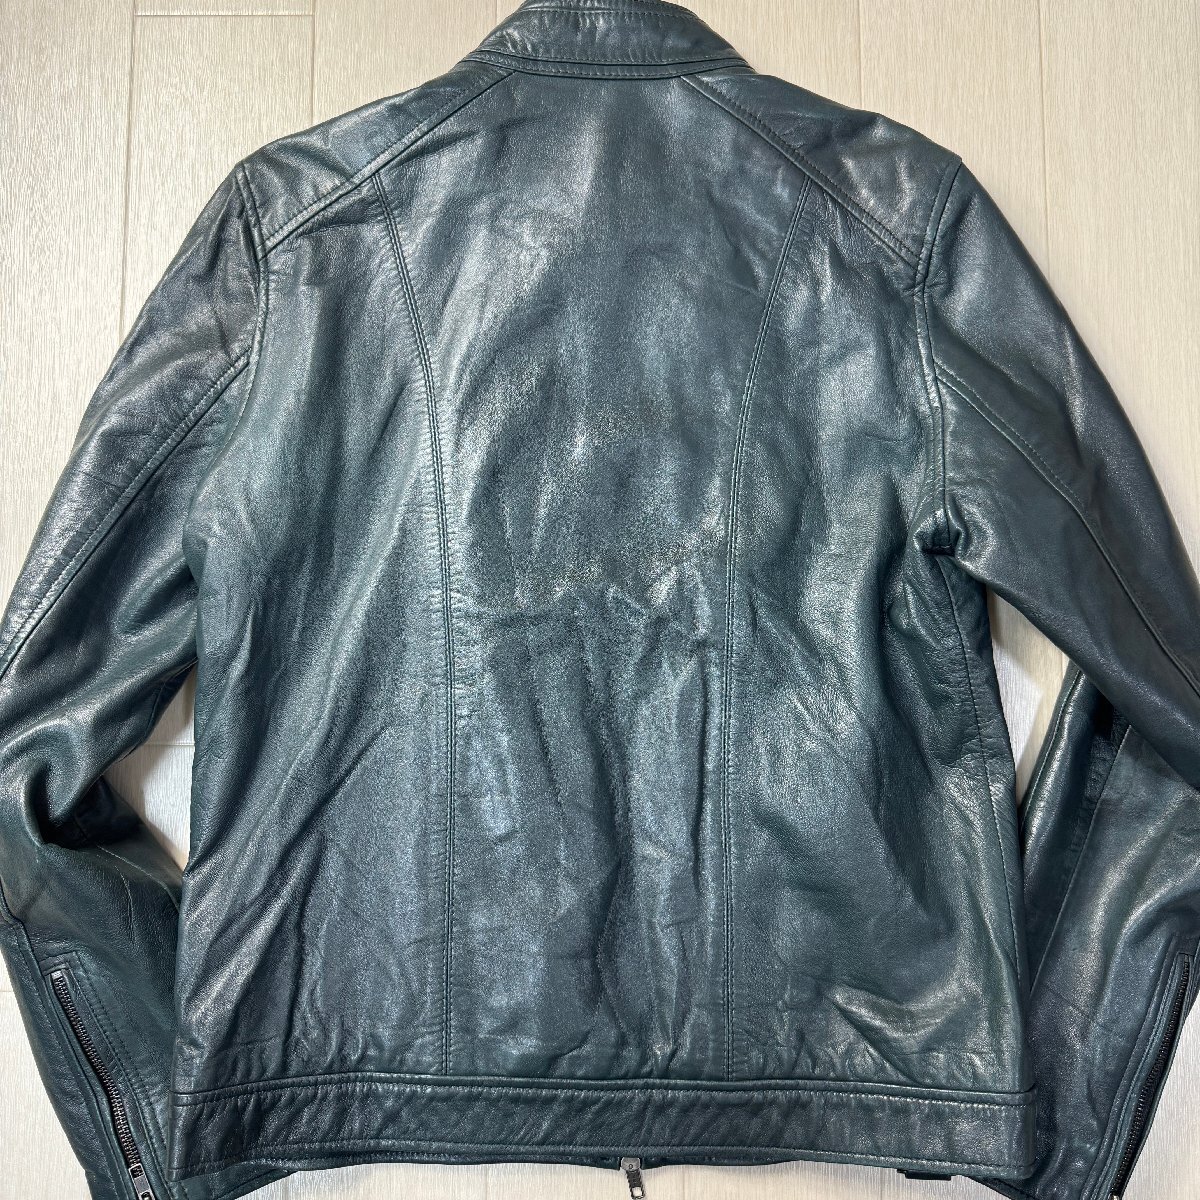  superior article /L corresponding * dragon g- leather /Liugoo Leathers ram leather sheep leather single rider's jacket blouson double Zip men's deep green 